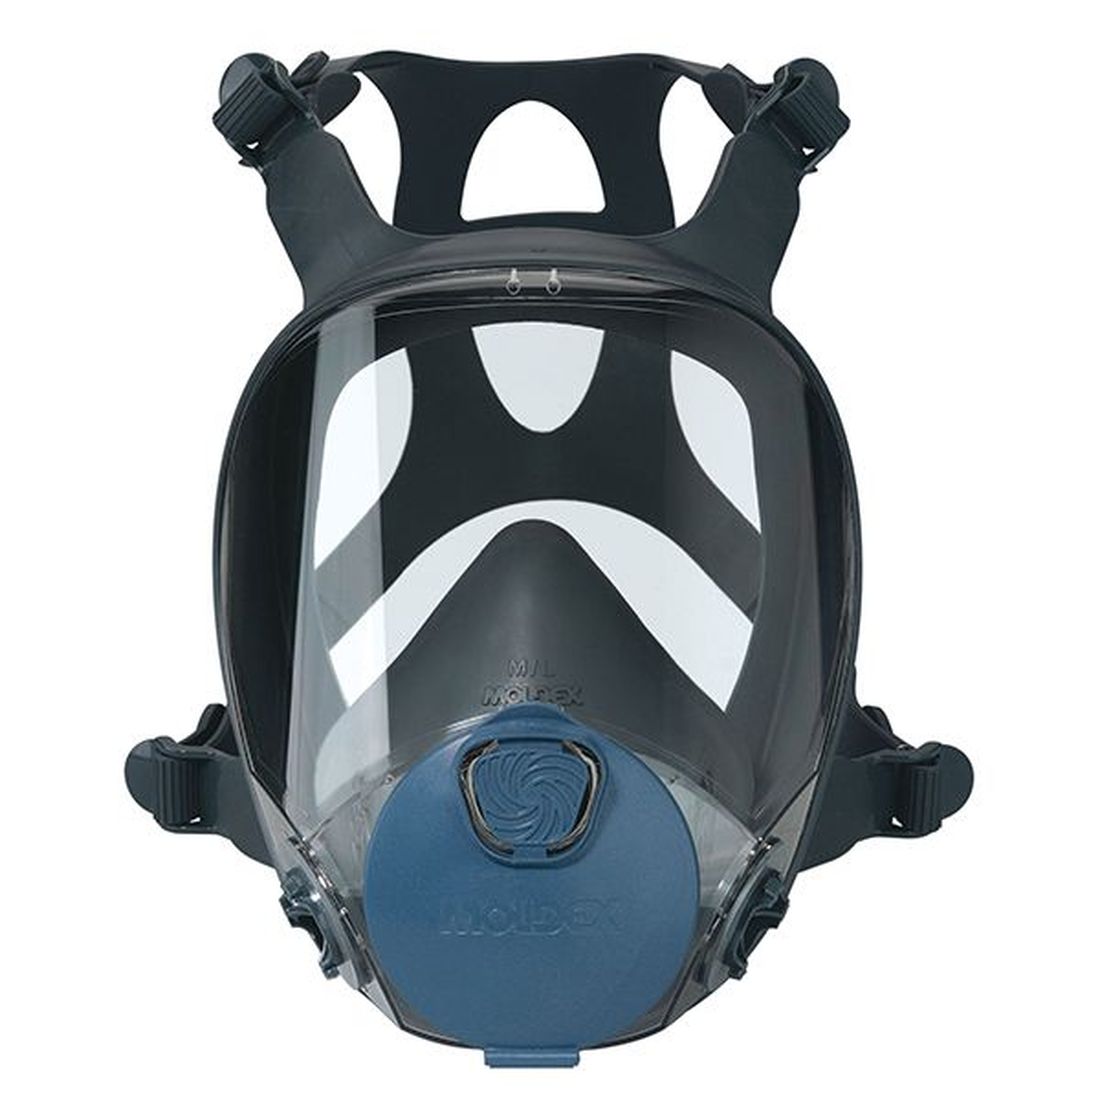 Moldex Series 9000 Full Face Mask (Small) No Filters                                   